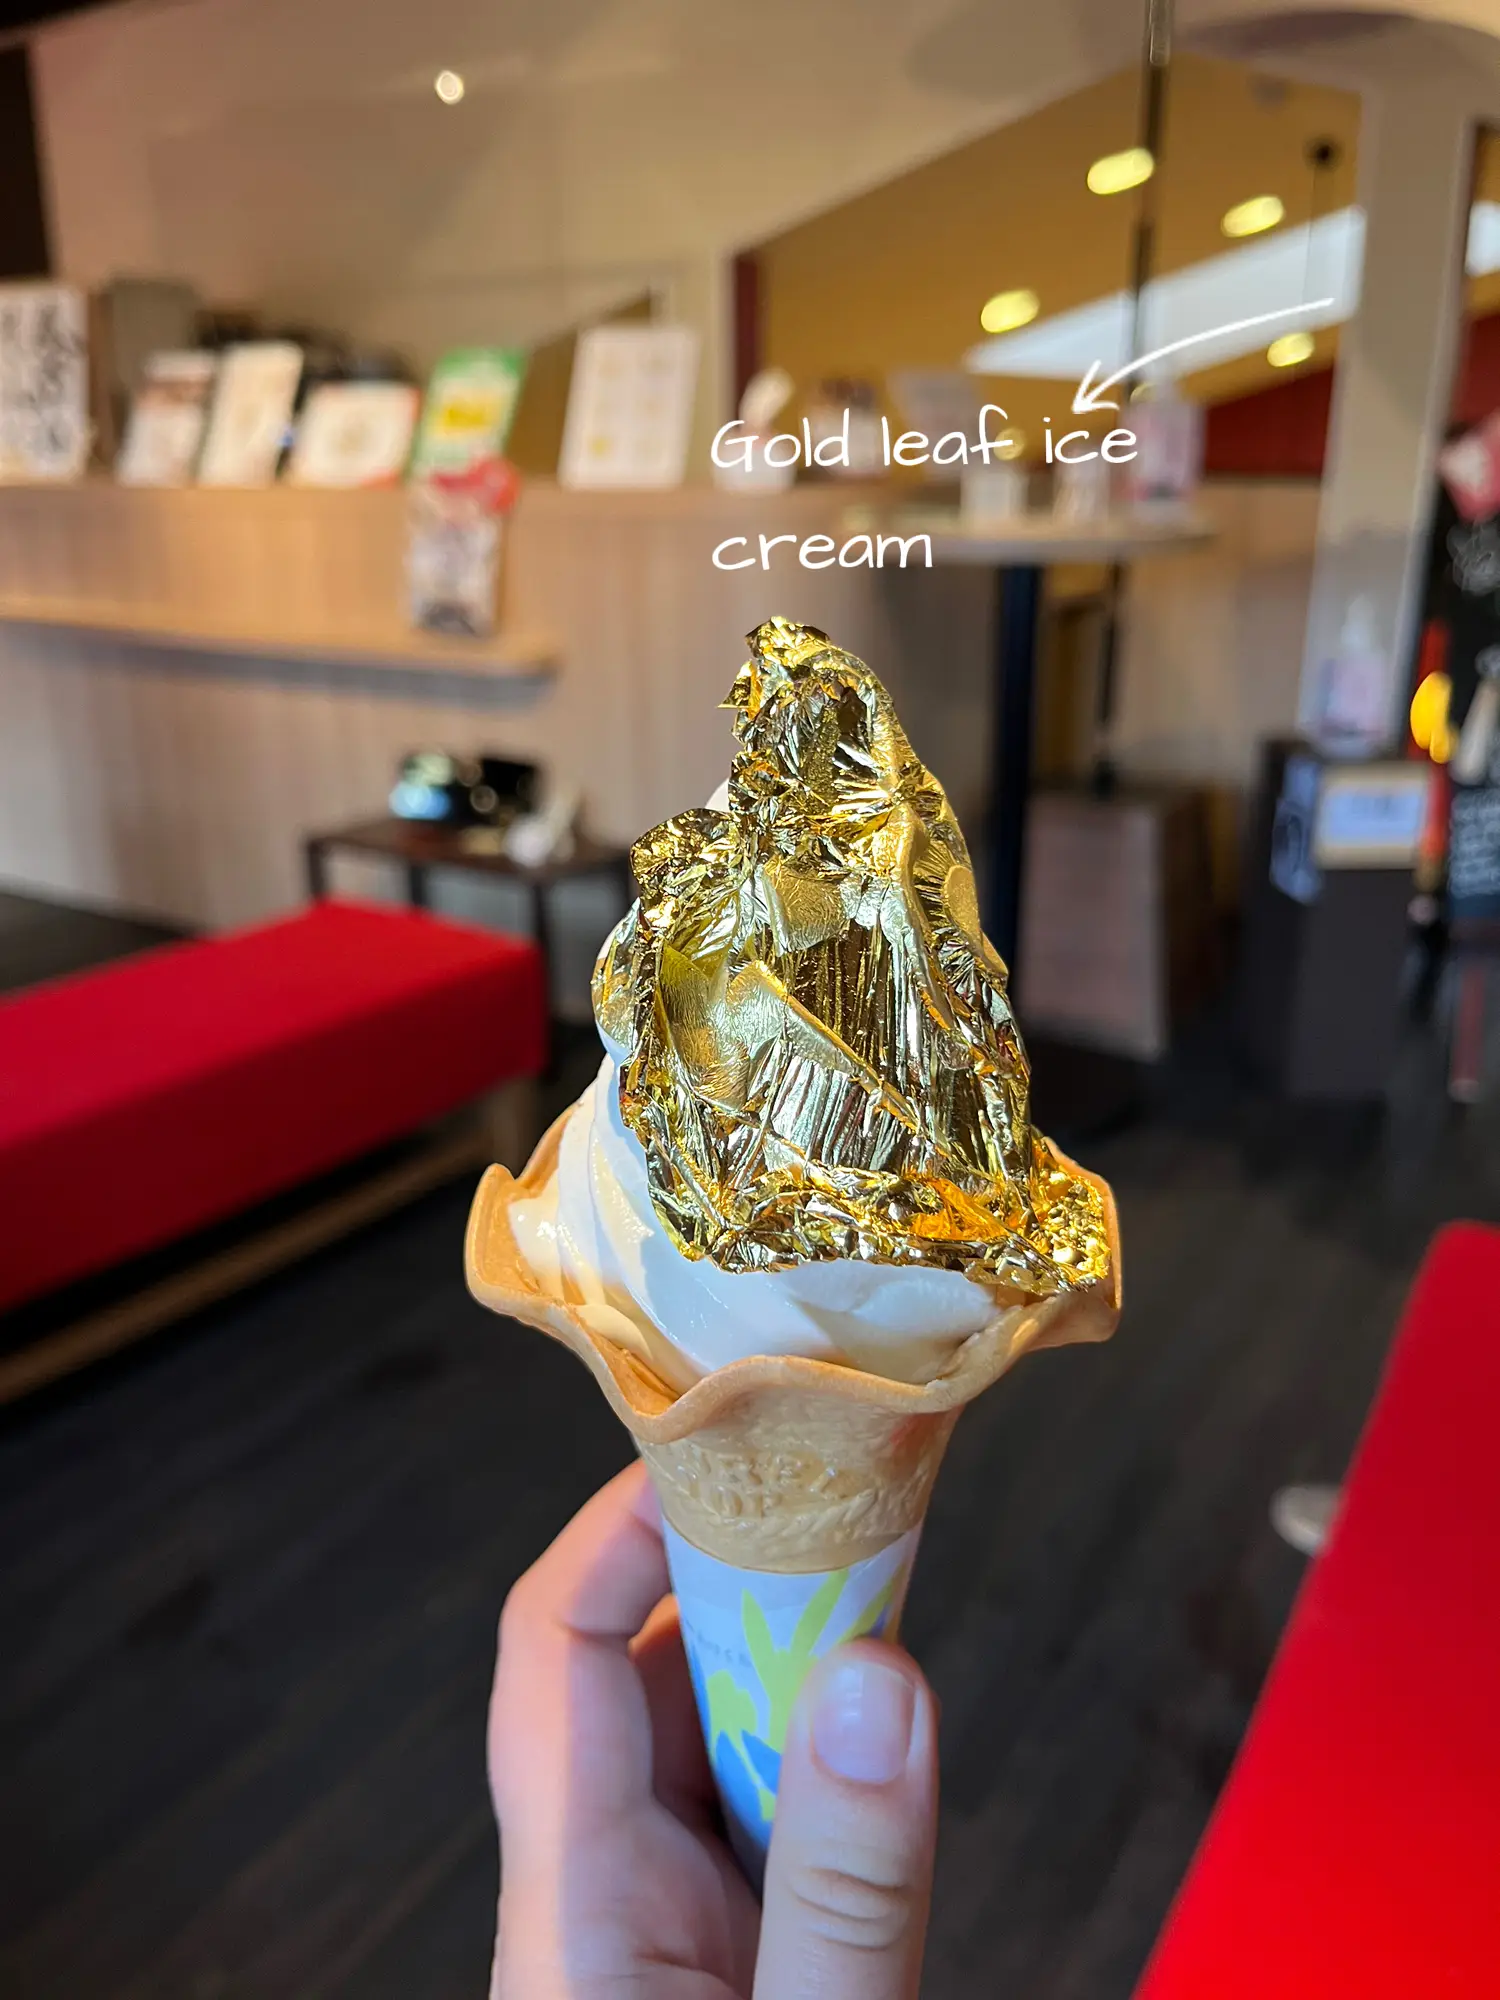  A person is holding a large ice cream cone with a gold leaf on it.